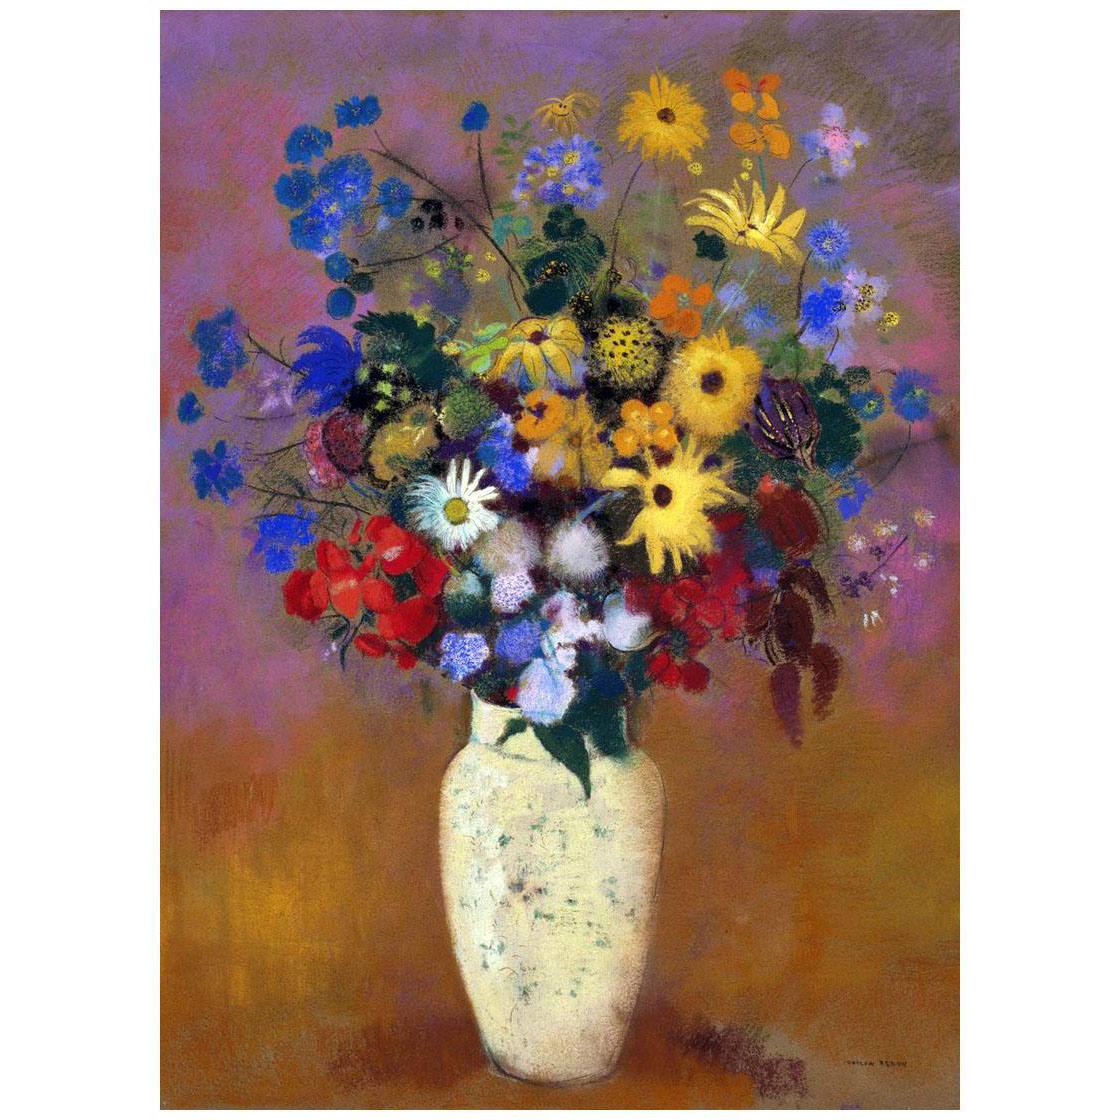 Odilon Redon. Bouquet in Japanese Vase. 1912-1914. Private collection